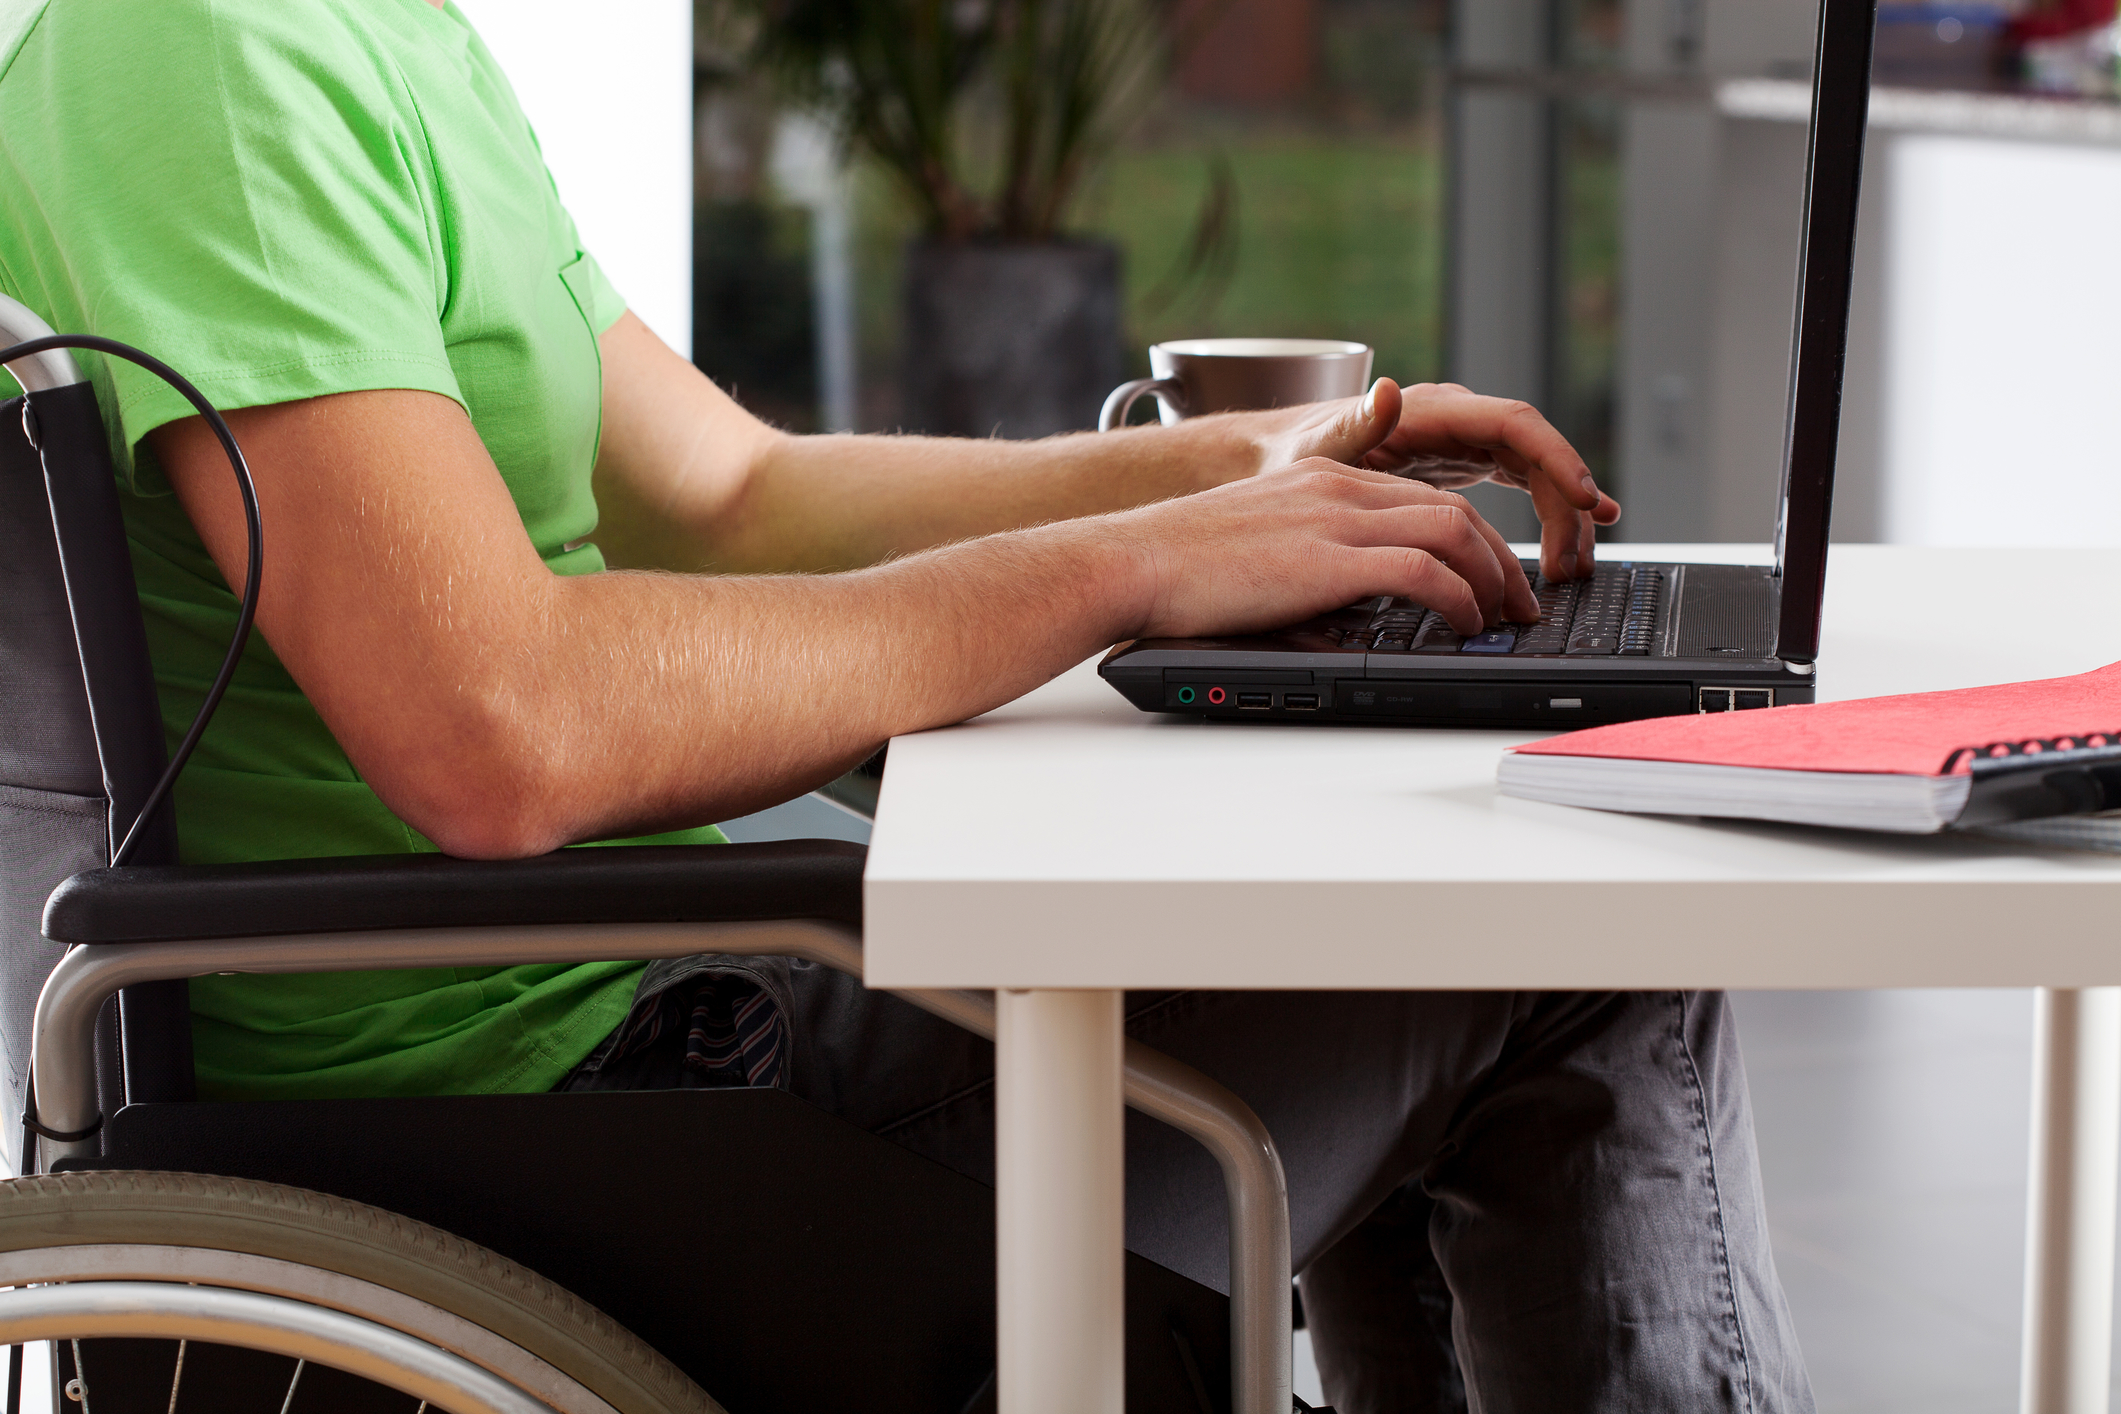 person in wheelchair typing on laptop